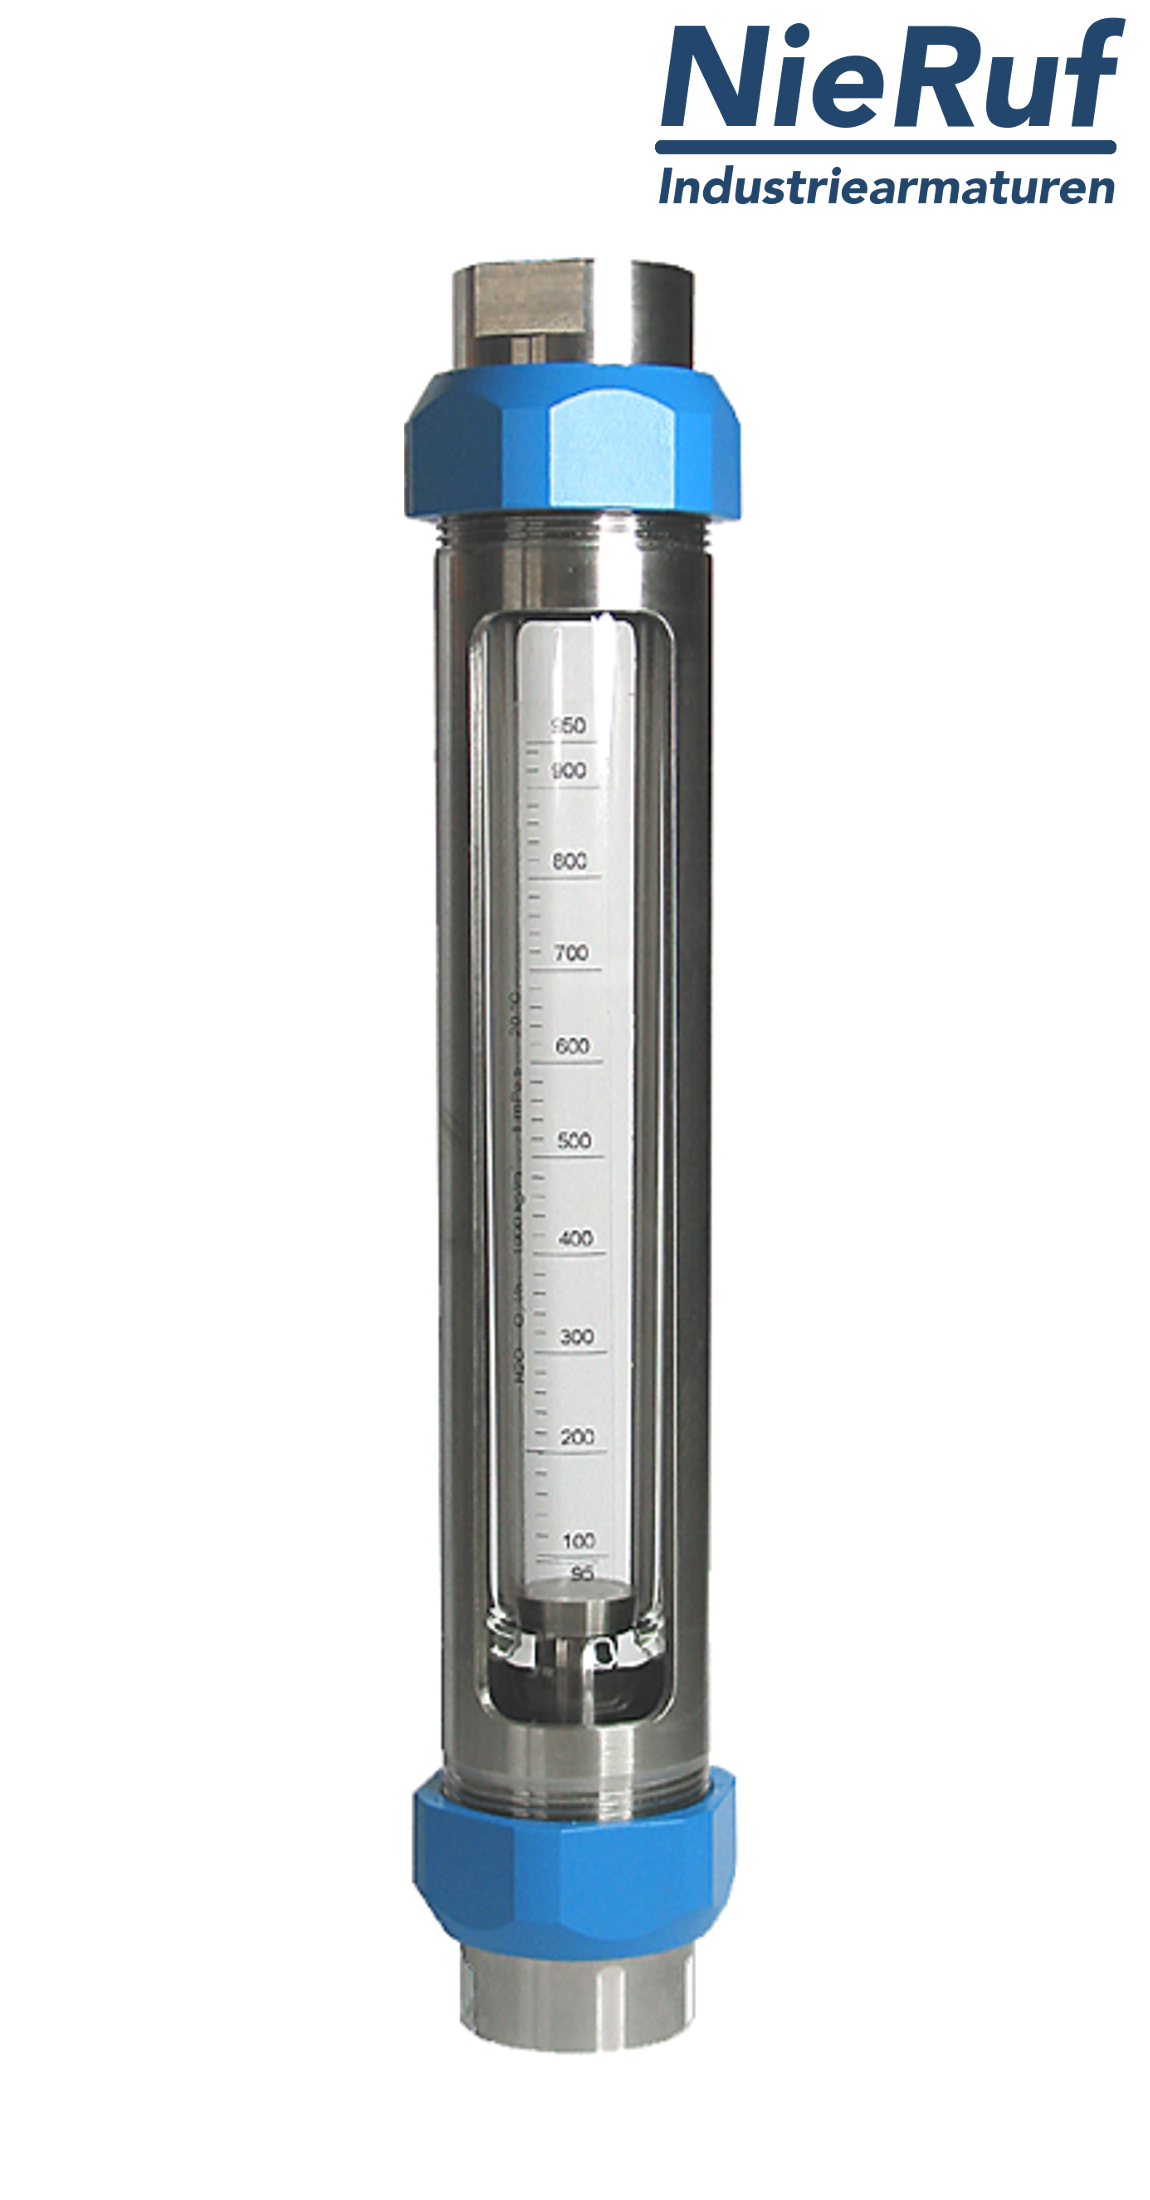 Variable area flowmeter stainless steel + borosilicate 1" inch 6000.0 - 20000 l/h water FKM